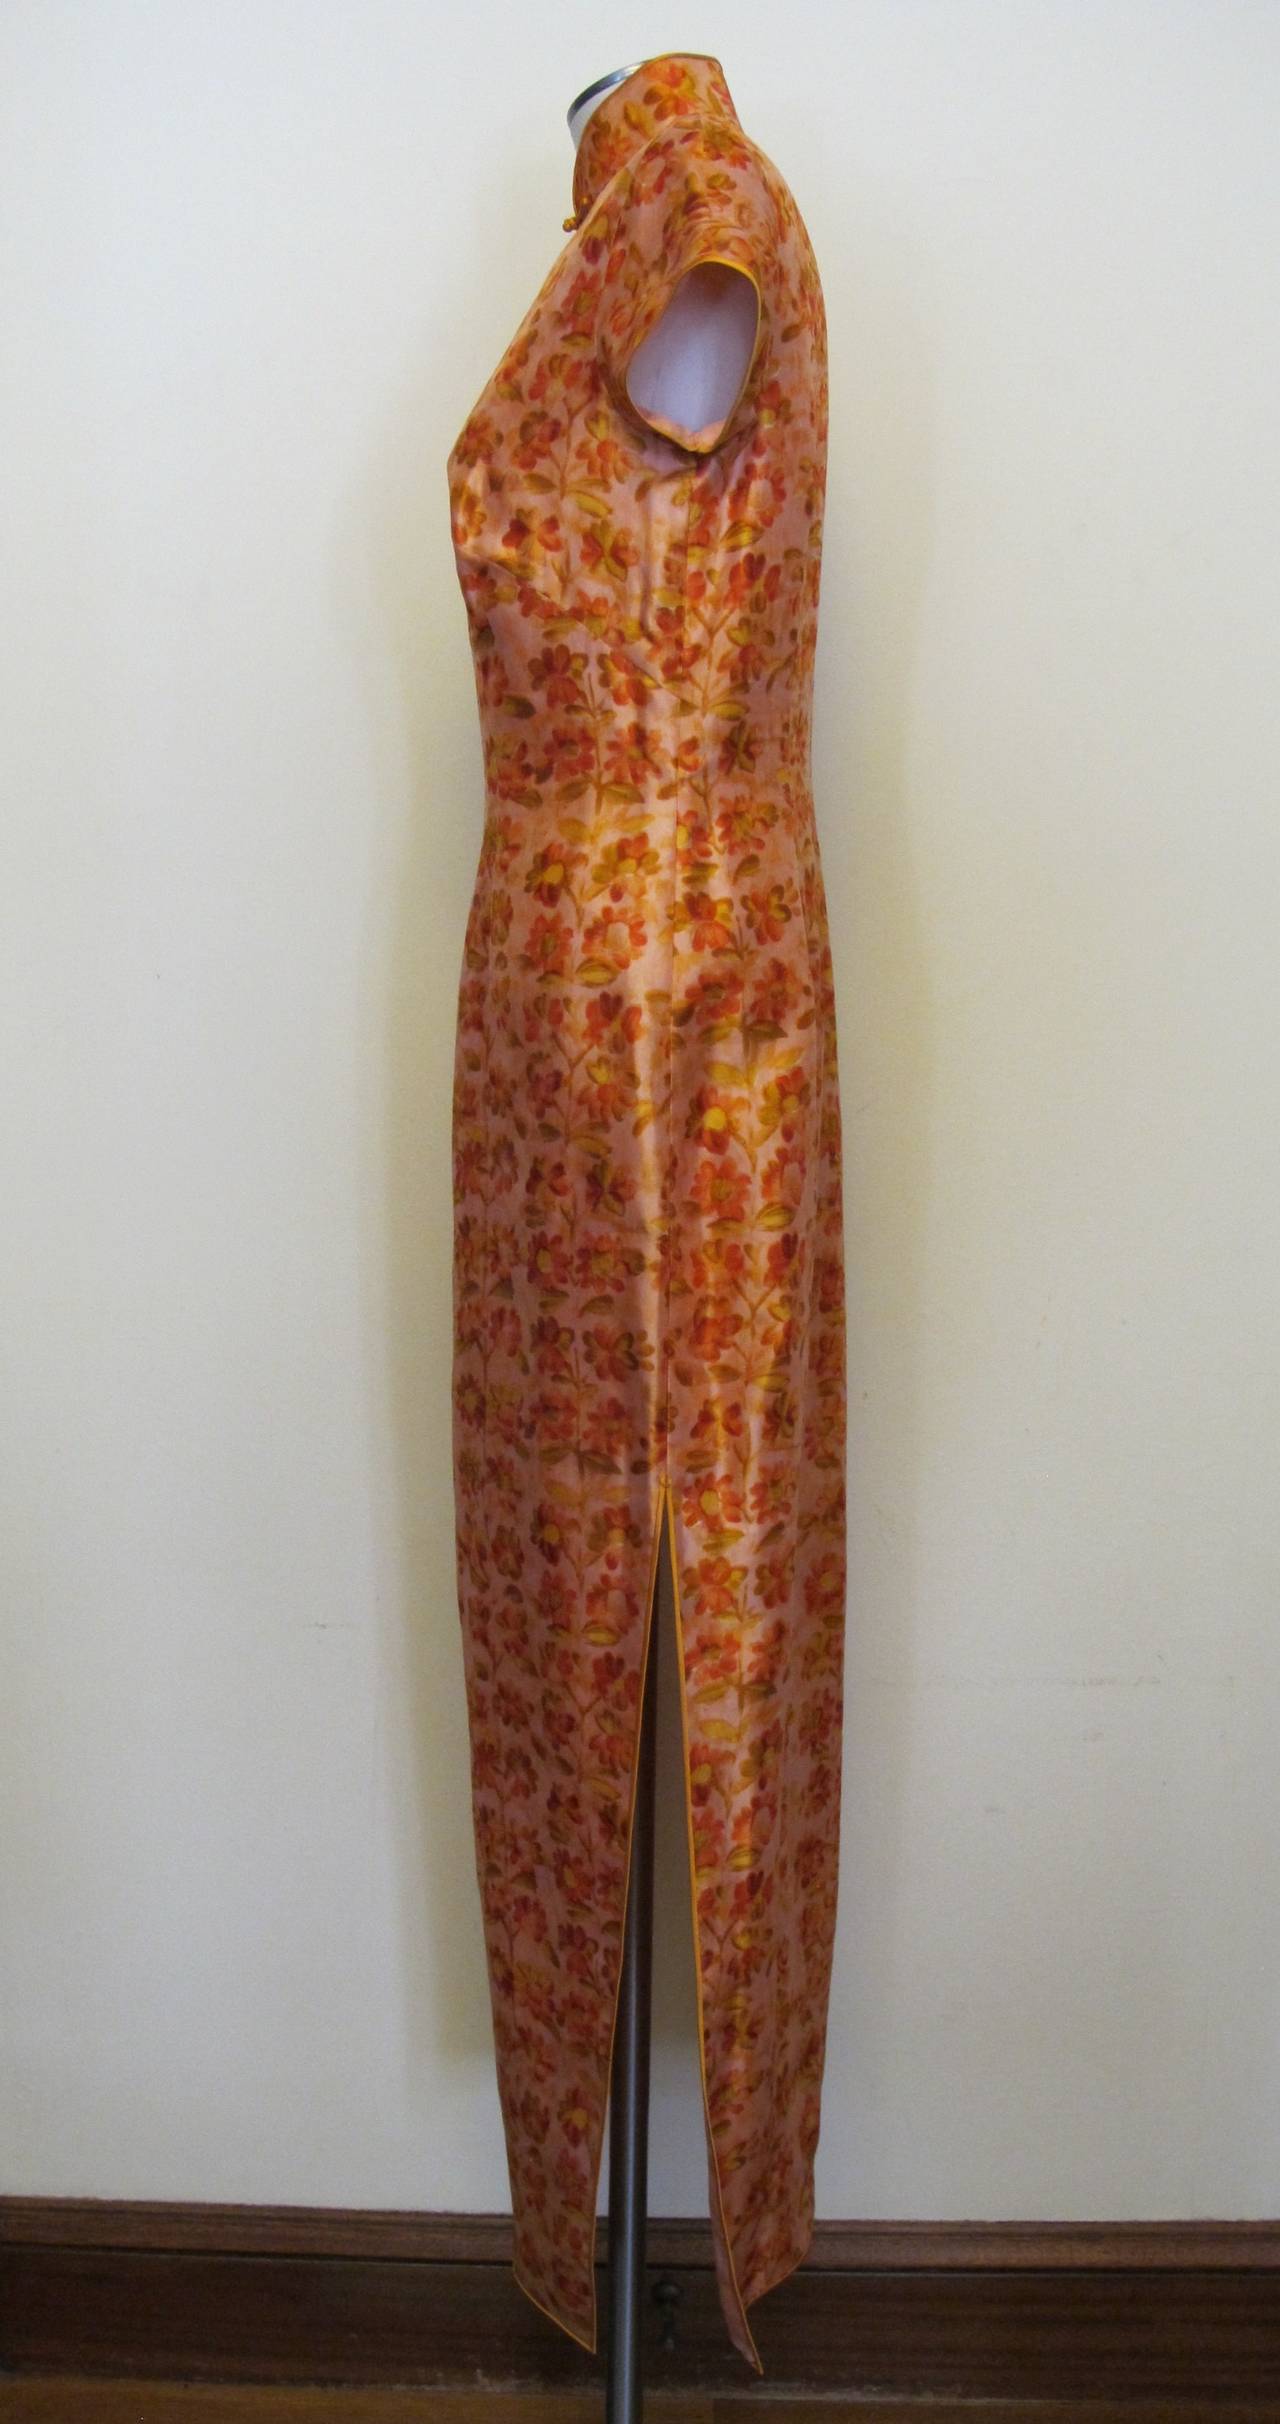 This stunning Qipao Salmon Silk Dress which is fully lined was donated to Helpers by the Fashion Director of Saks Fifth Avenue. It is new and has never been worn. It is perfect for Summer season with short sleeves and golden yellow silk satin